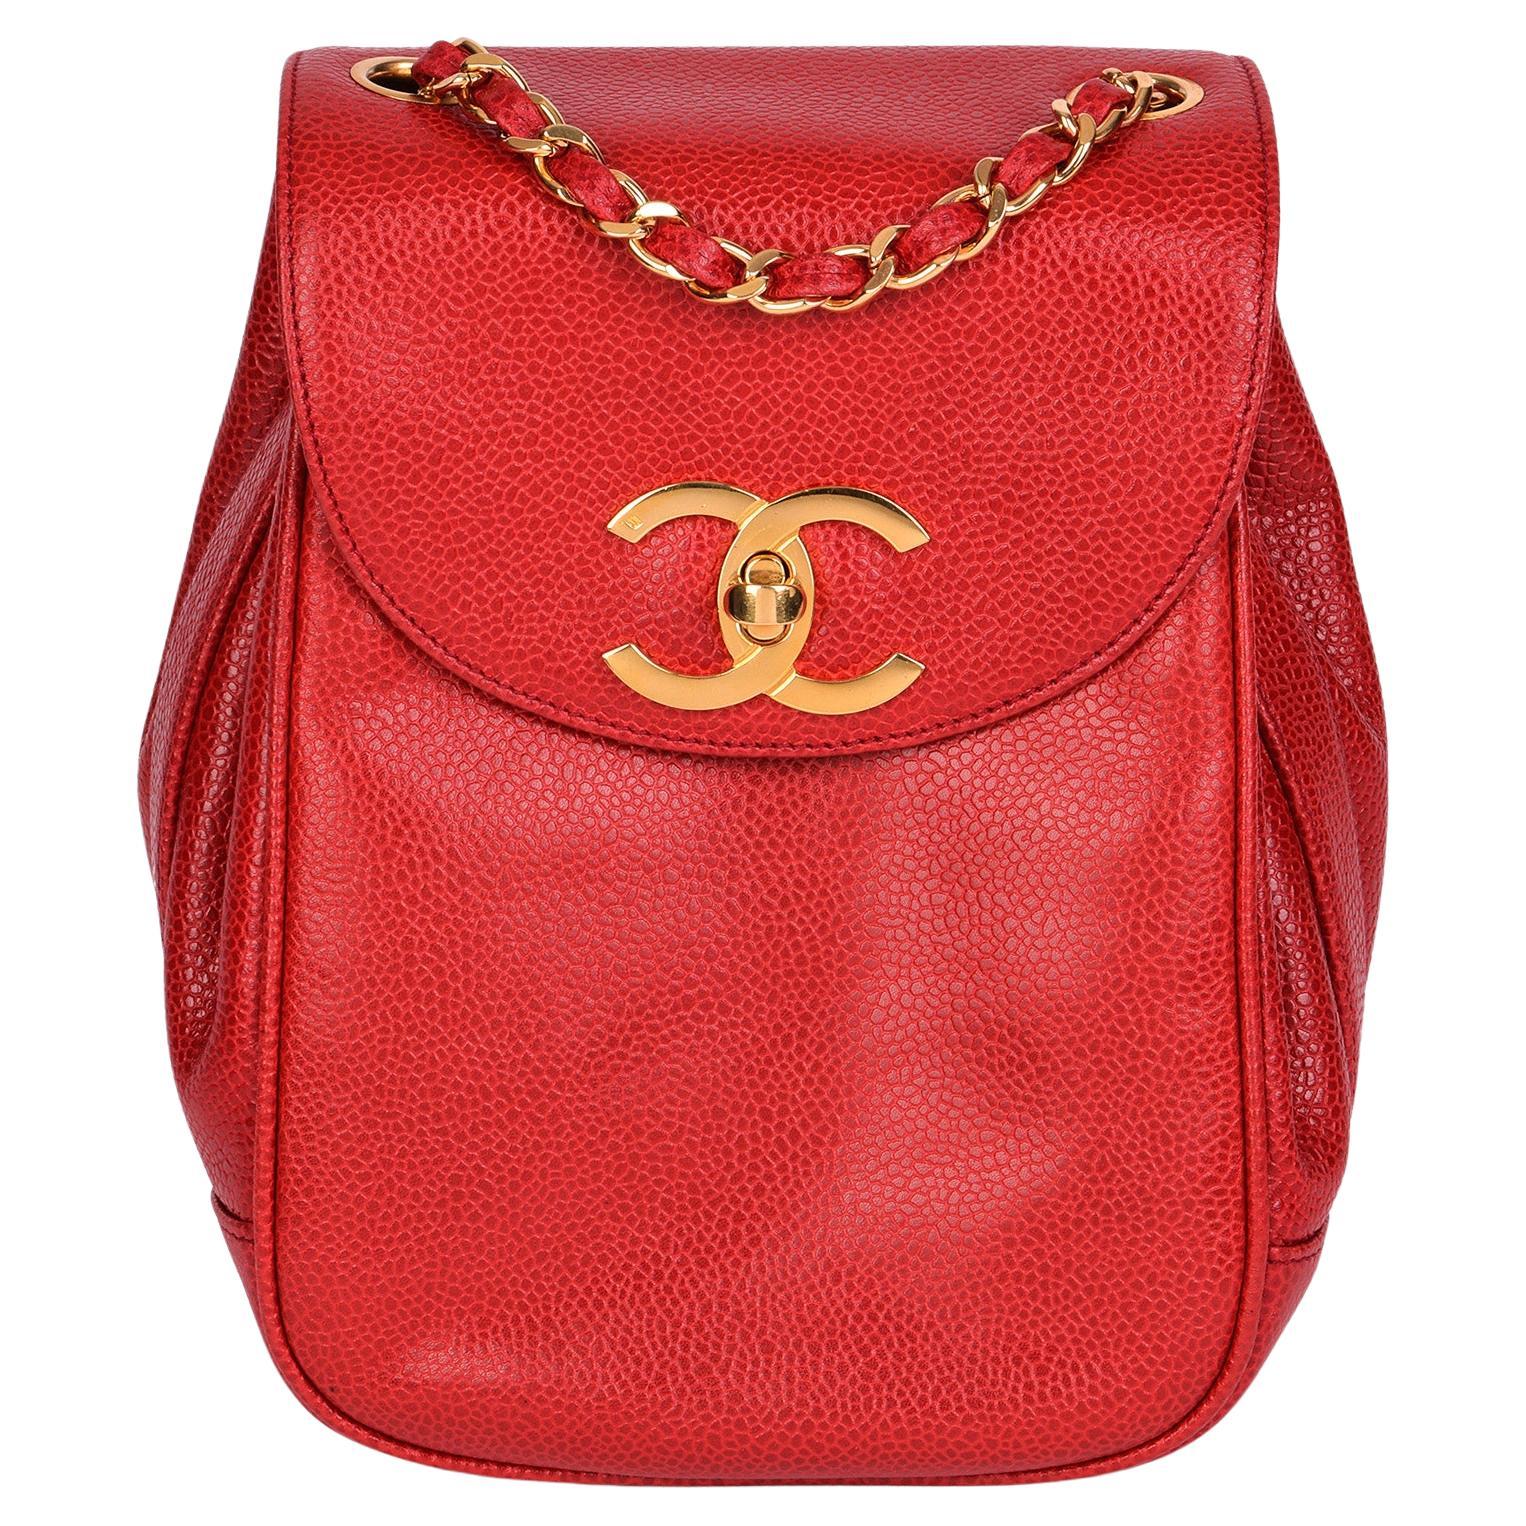 CHANEL Red Caviar Leather Vintage XL Classic Single Flap Bag 